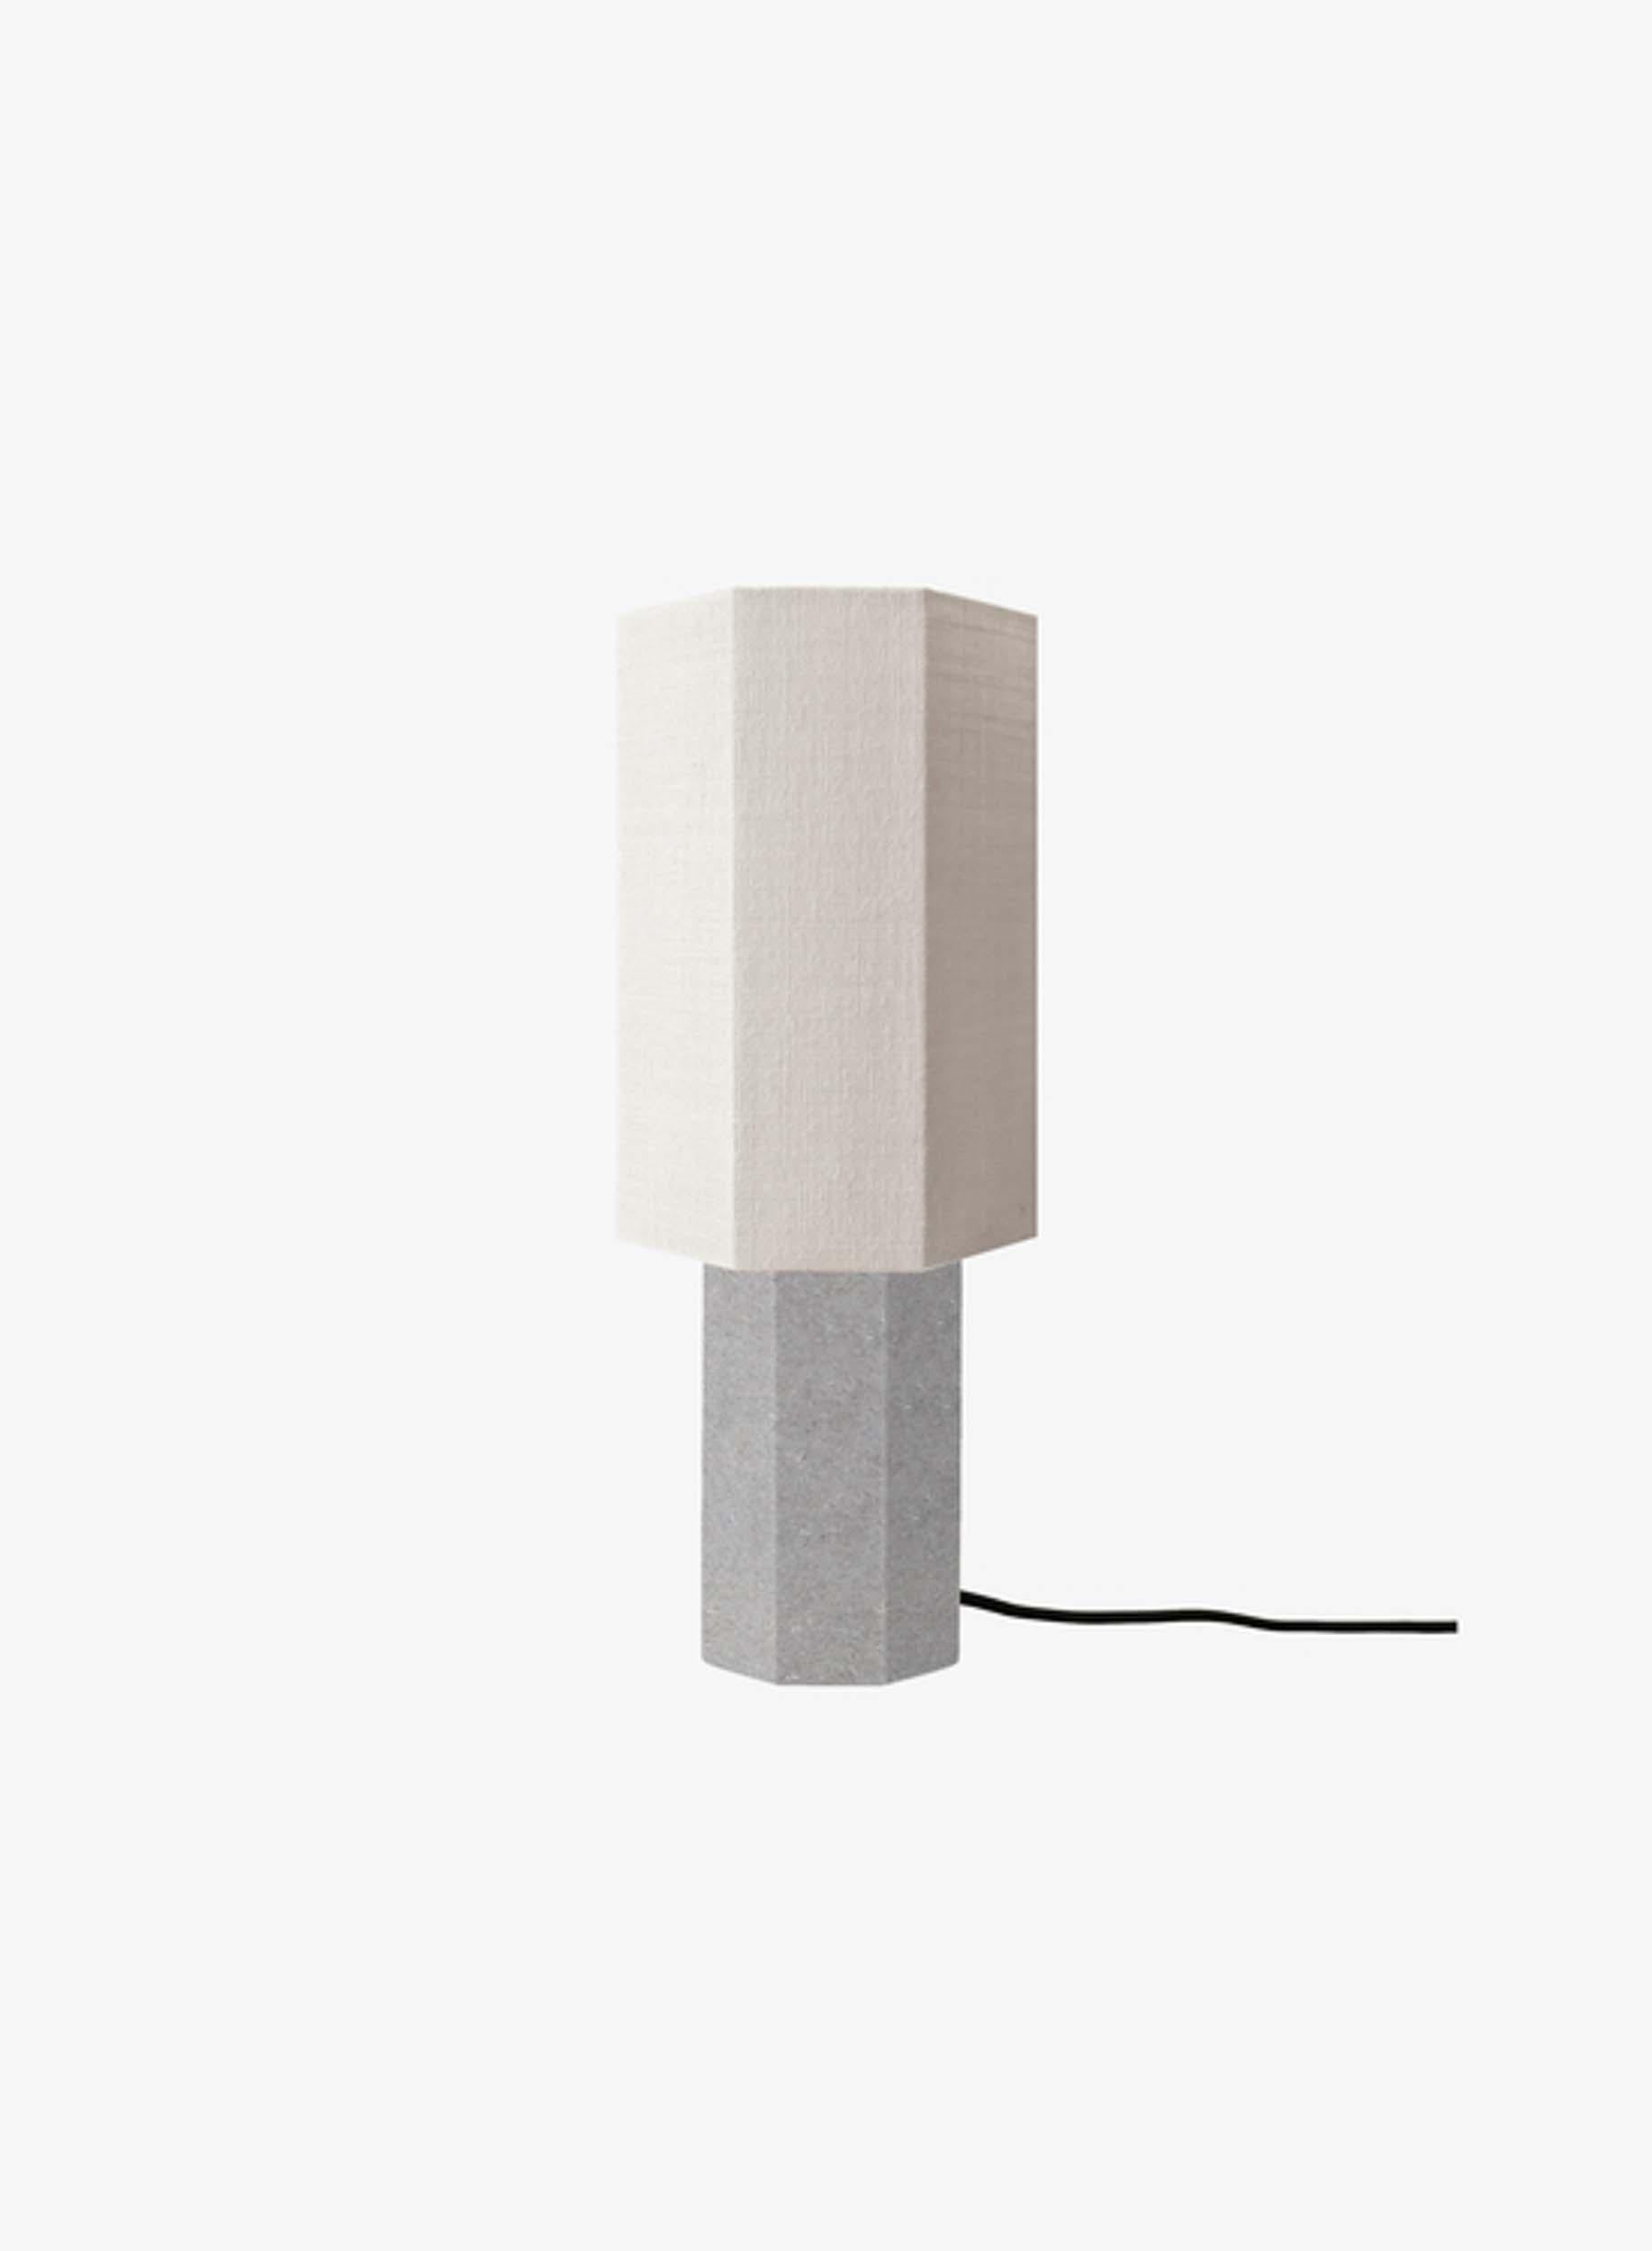 Table Lamp 'The Eight over Eight' by Louise Roe 

Designed in Denmark and manufactured in Italy.

Model shown in the picture: 
Base: Grey marble
Lampshade: white jute 

Dimensions : 
Height: 60 cm
Diameter: 21.5 cm

Louise Roe is a Copenhagen based